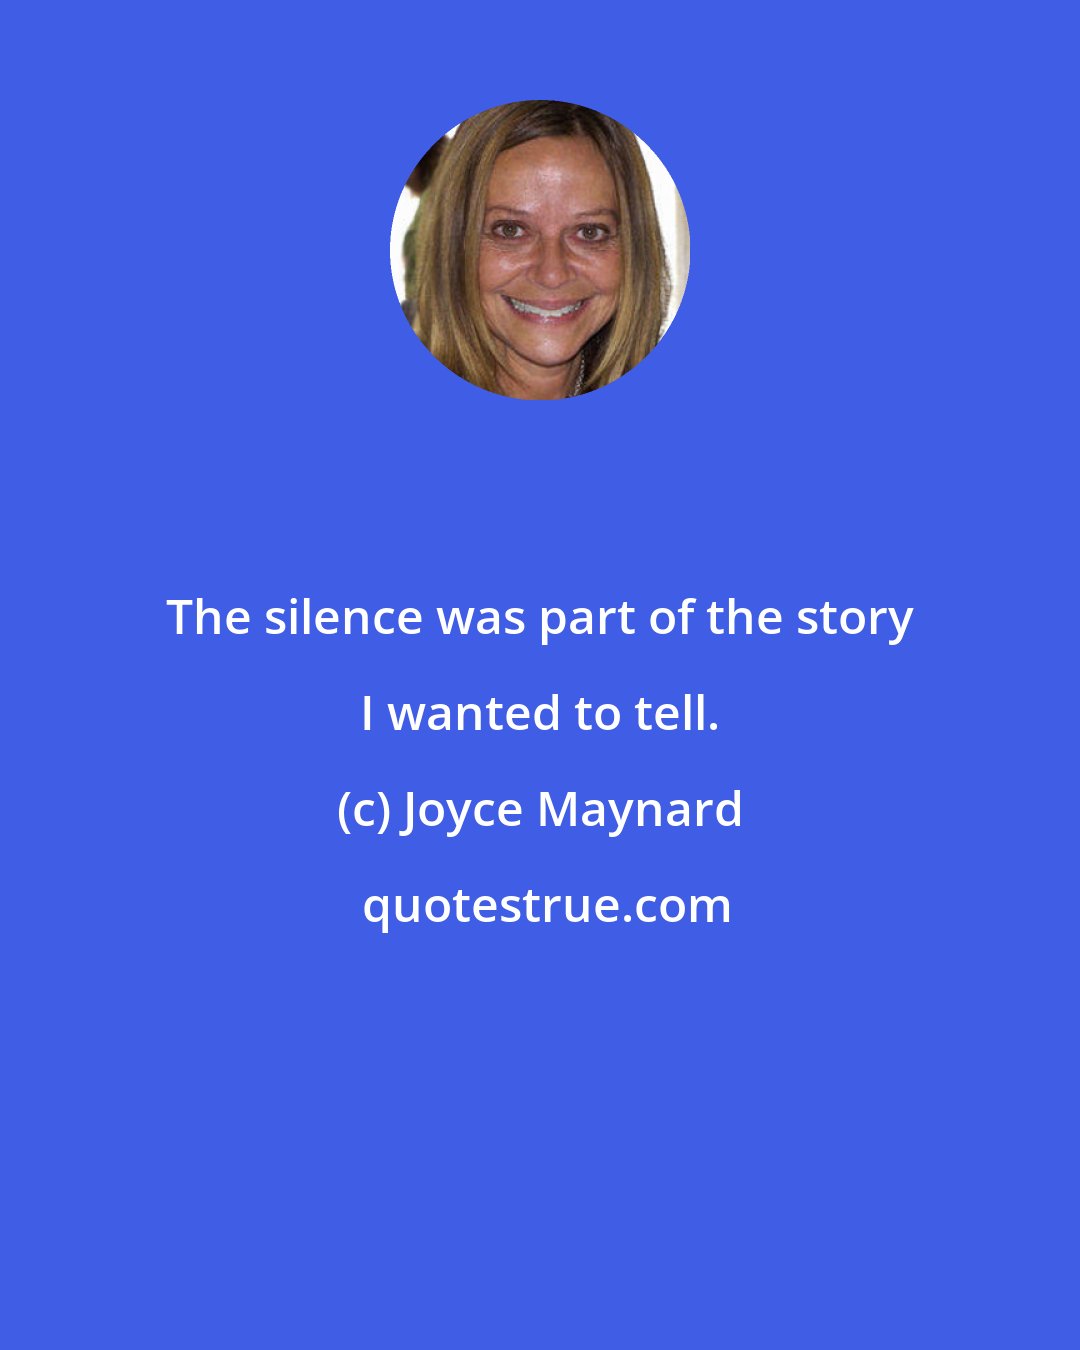 Joyce Maynard: The silence was part of the story I wanted to tell.